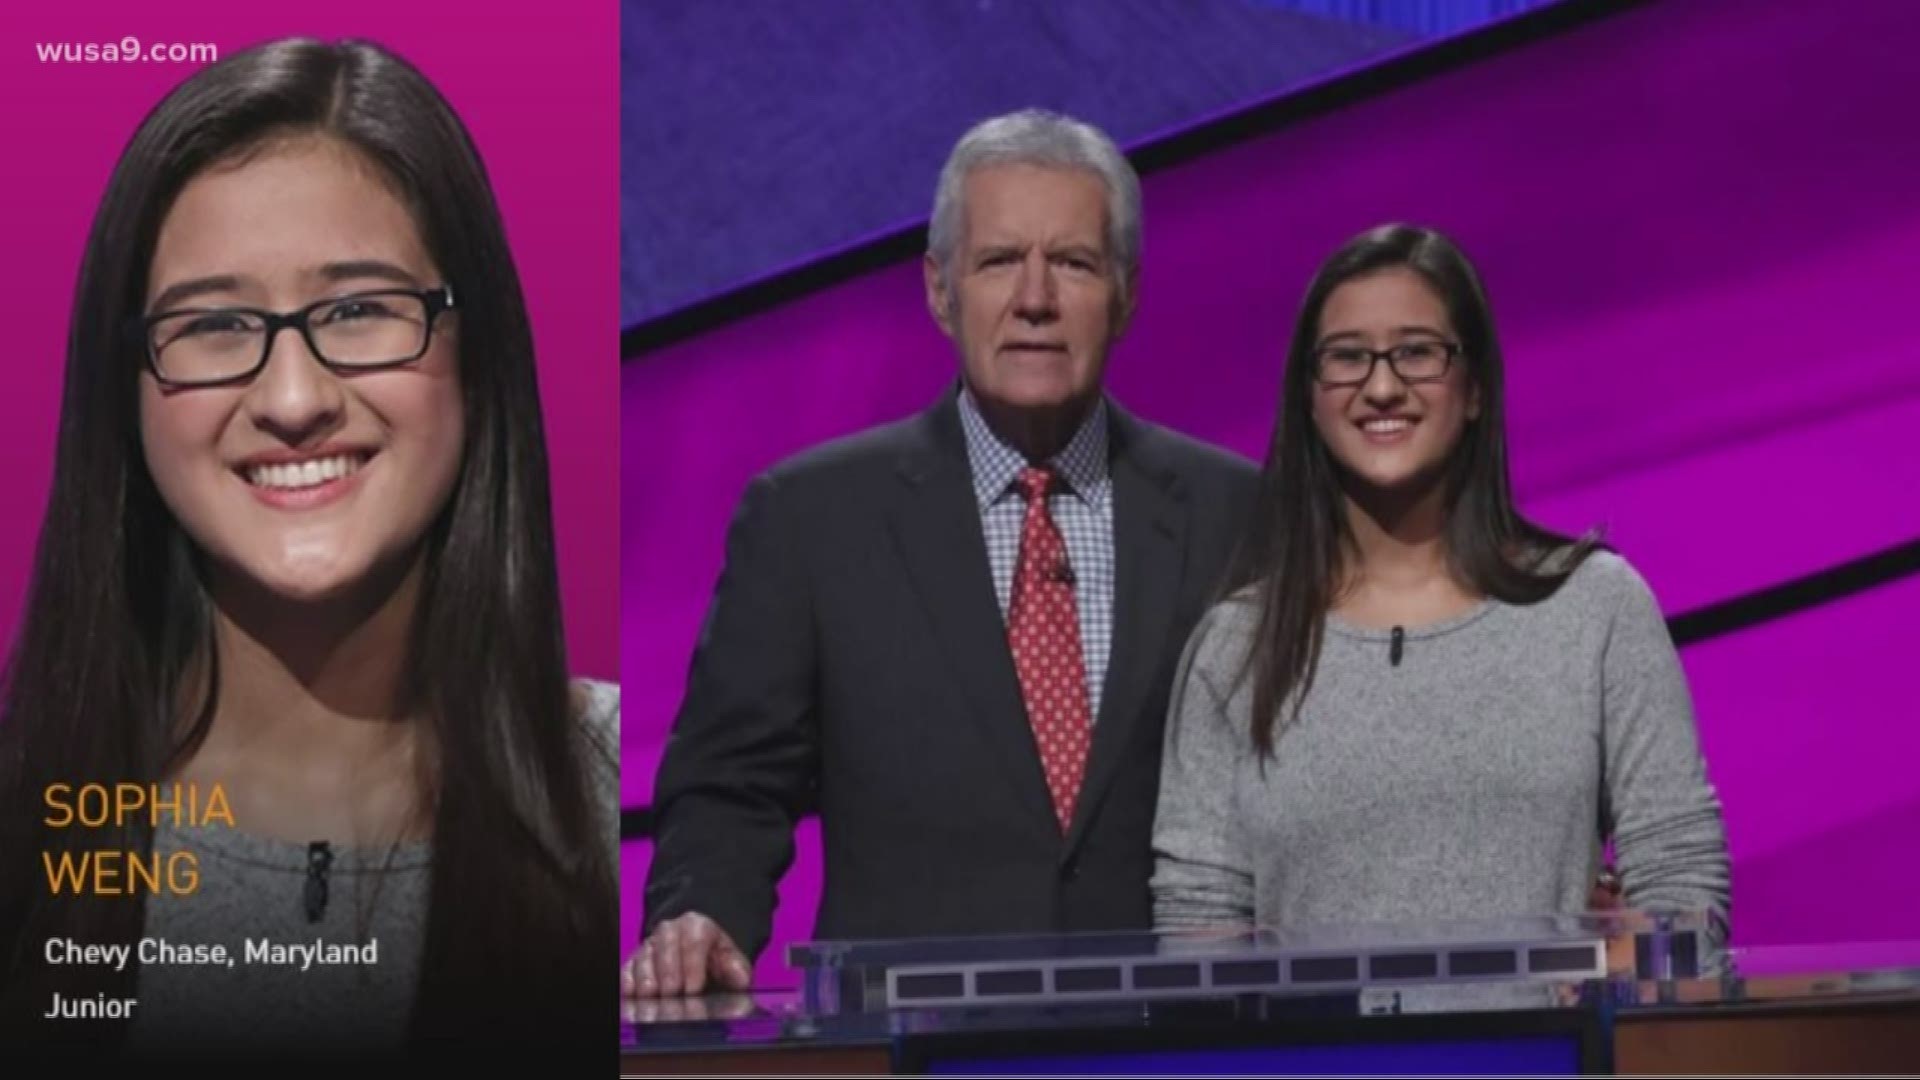 Go Sophia Weng! She is from Chevy Chase, Maryland and will be on Jeopardy this week. She is a junior at Montgomery Blair High School. We are rooting for you, Sophia!